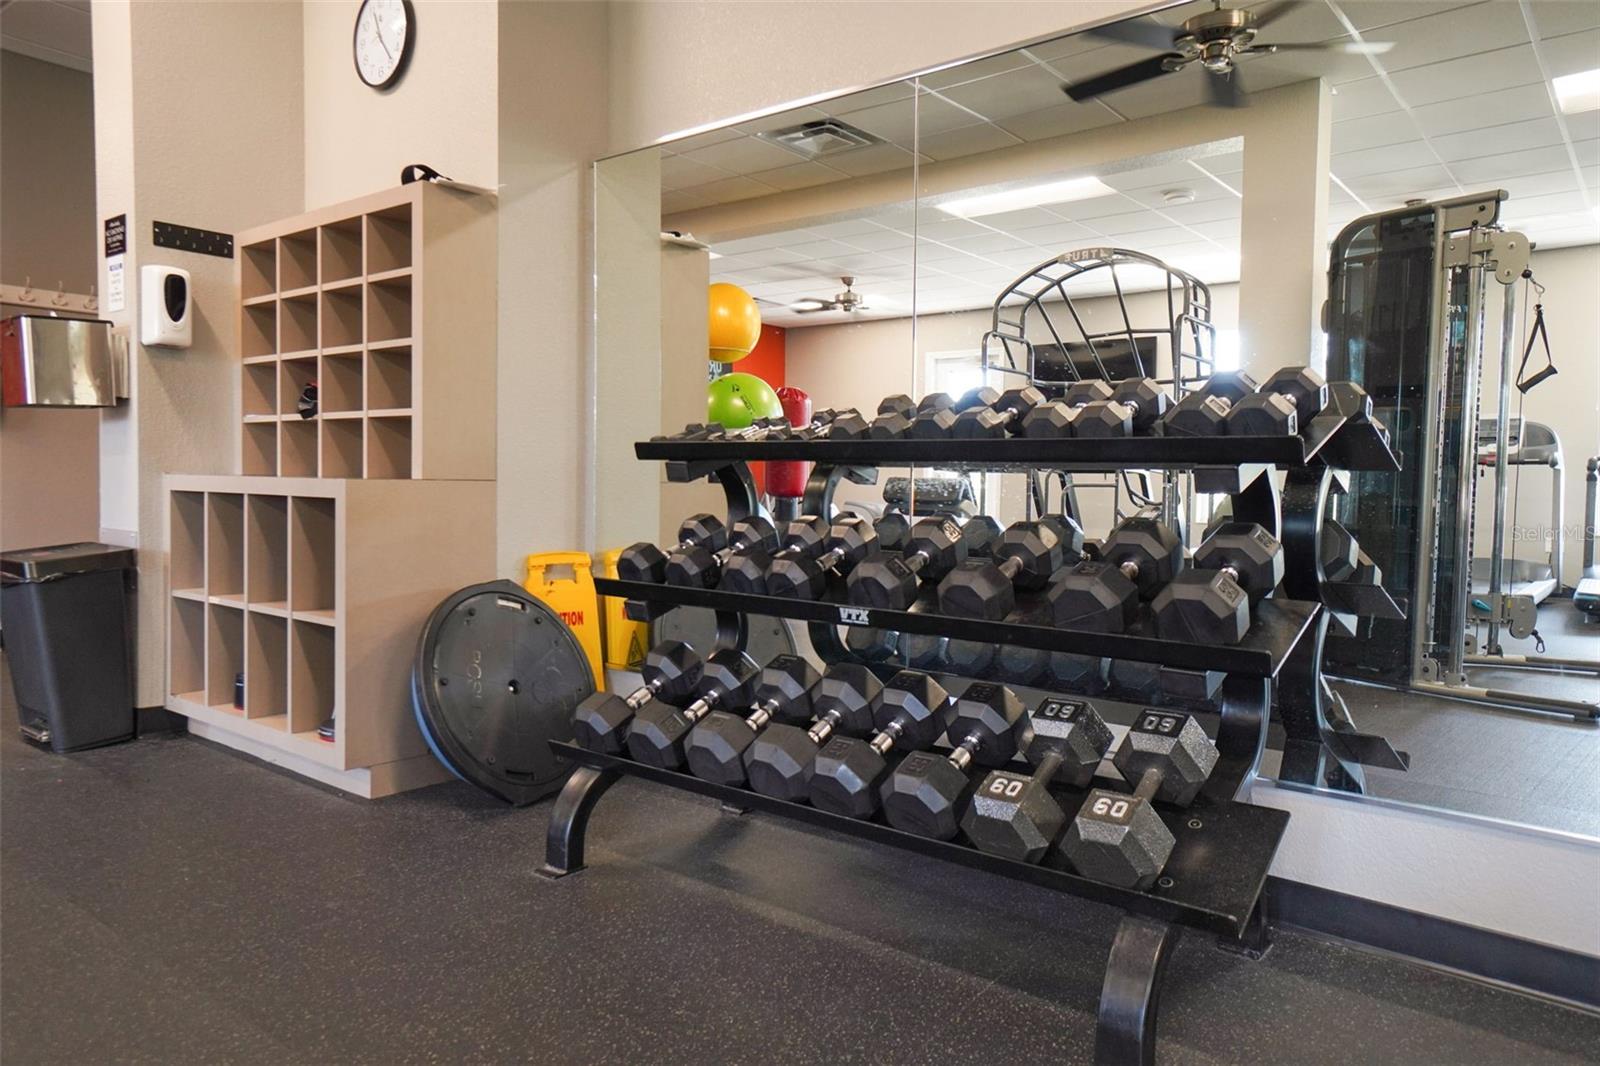 There is ample equipment to keep you in shape at the fitness center.